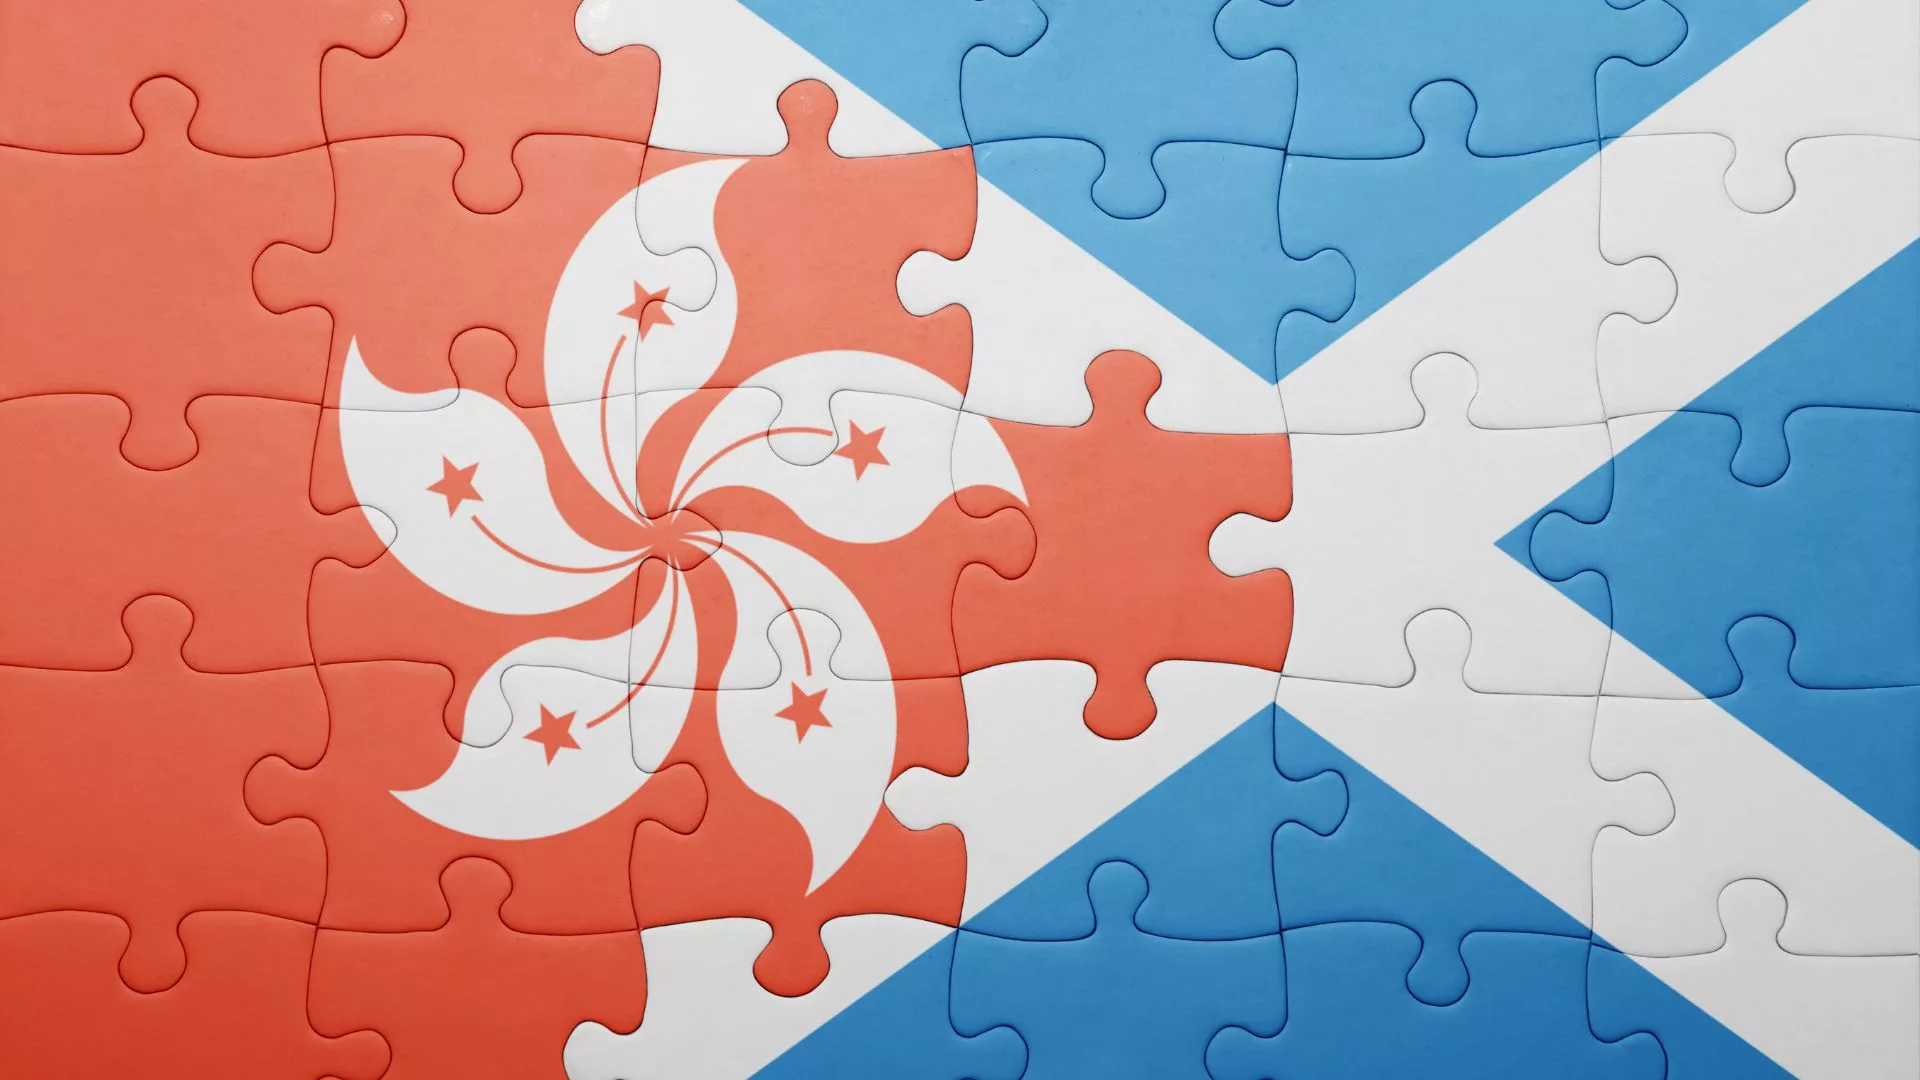 Scotland Hong Kong flags in puzzle